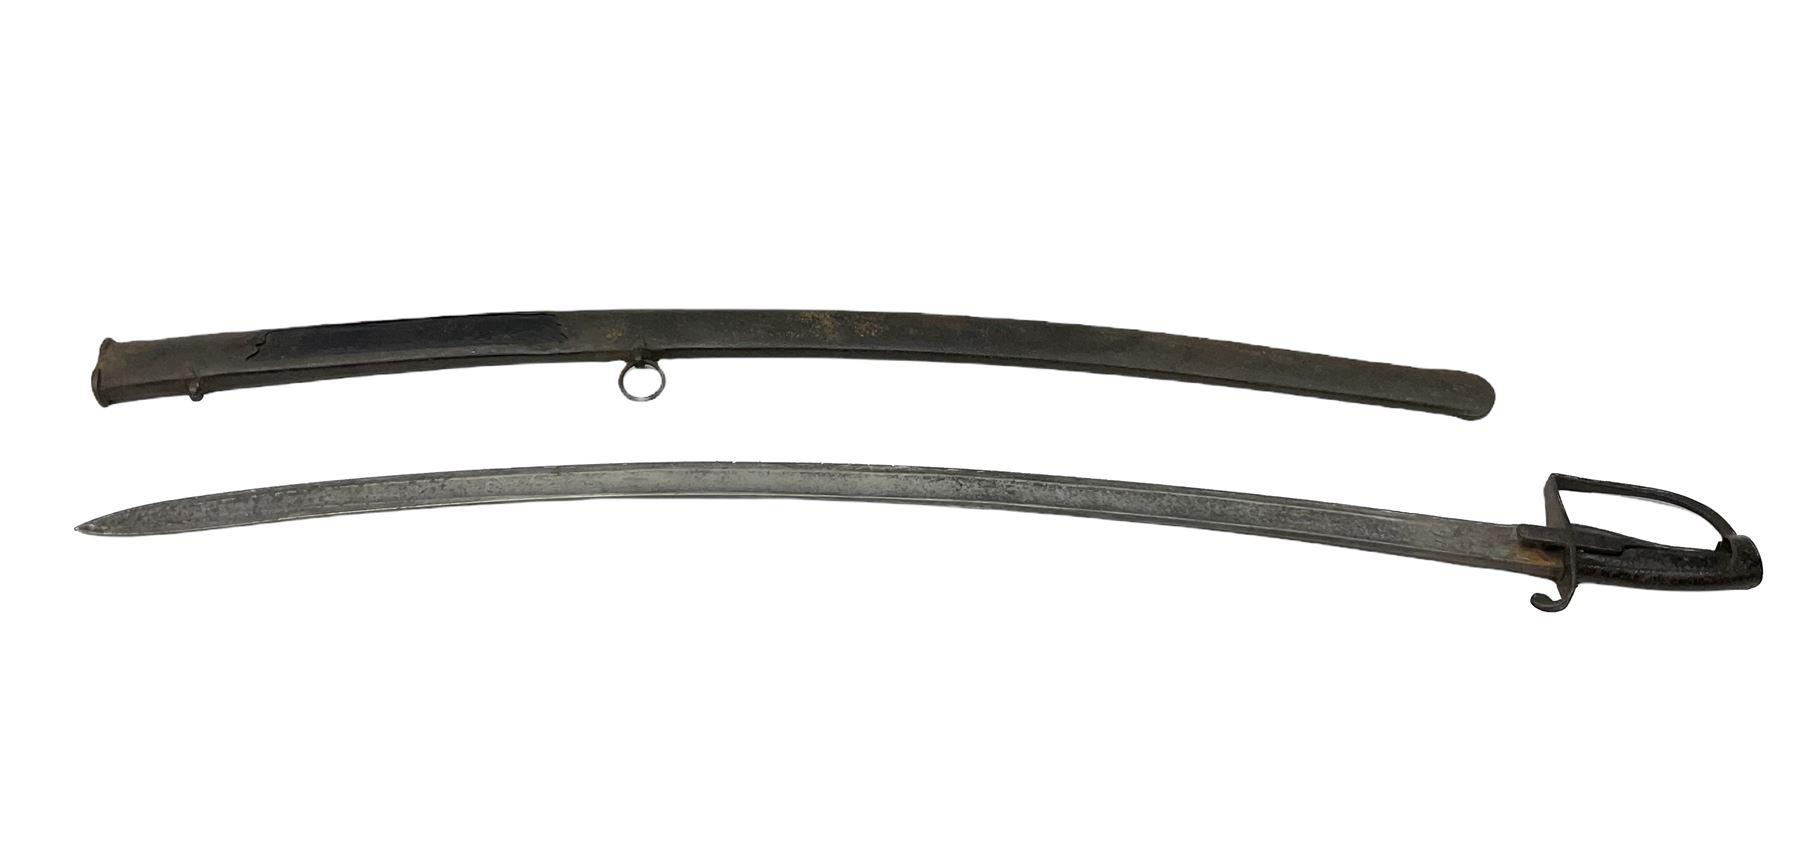 Late 18th century Gill's Warranted Light Cavalry officer's sword